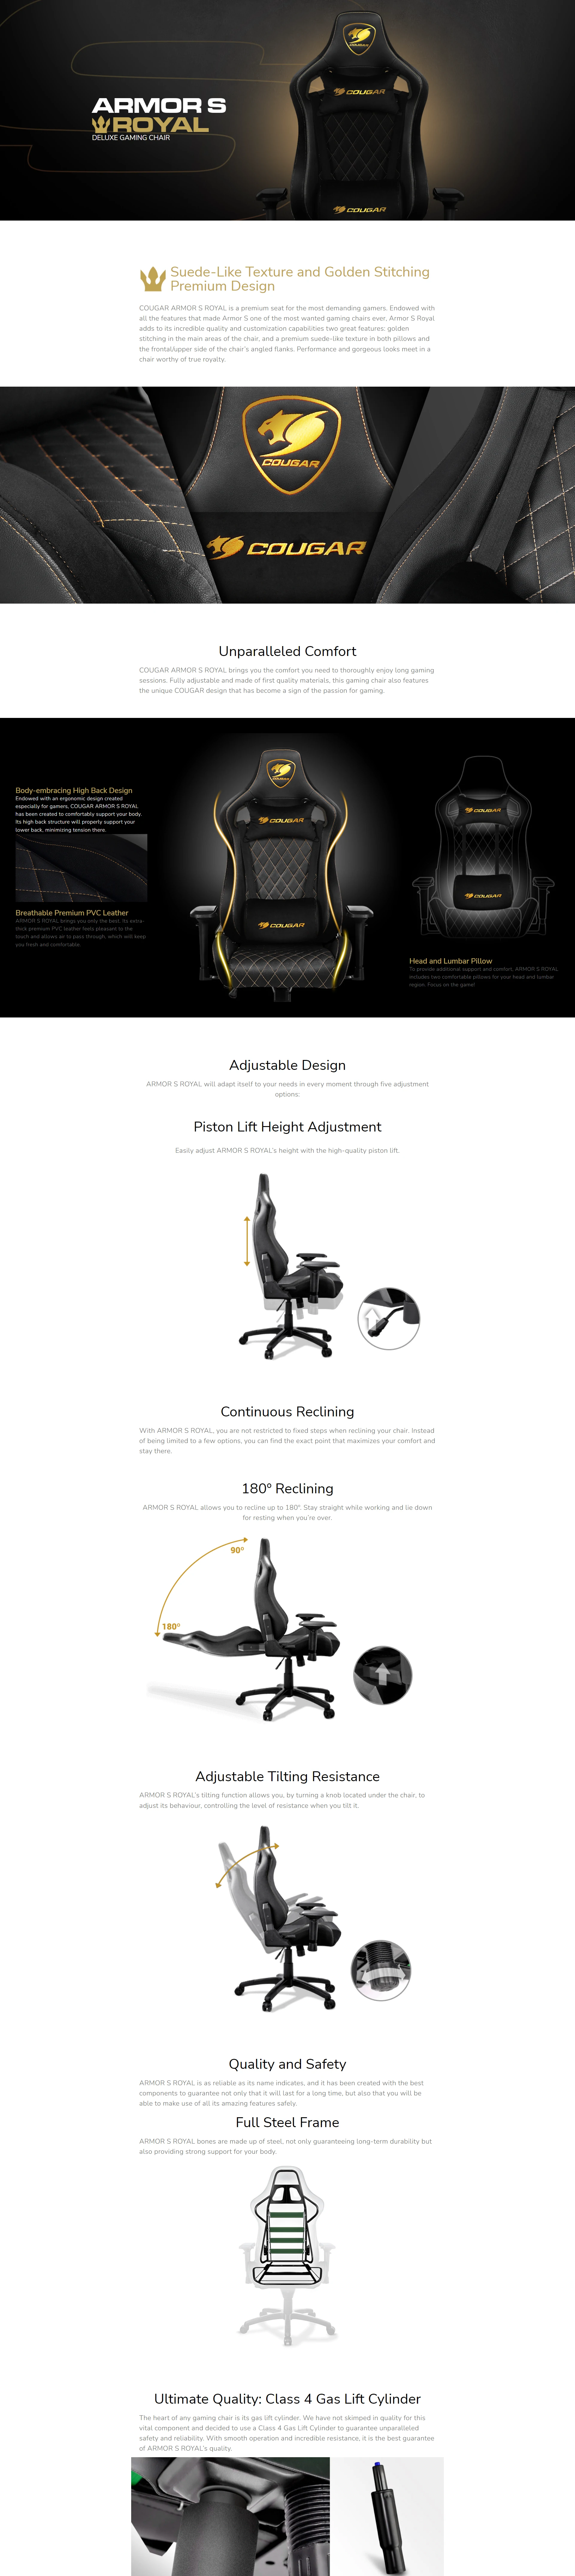 Overview - Cougar - Armor S Royal - Deluxe Gaming Chair